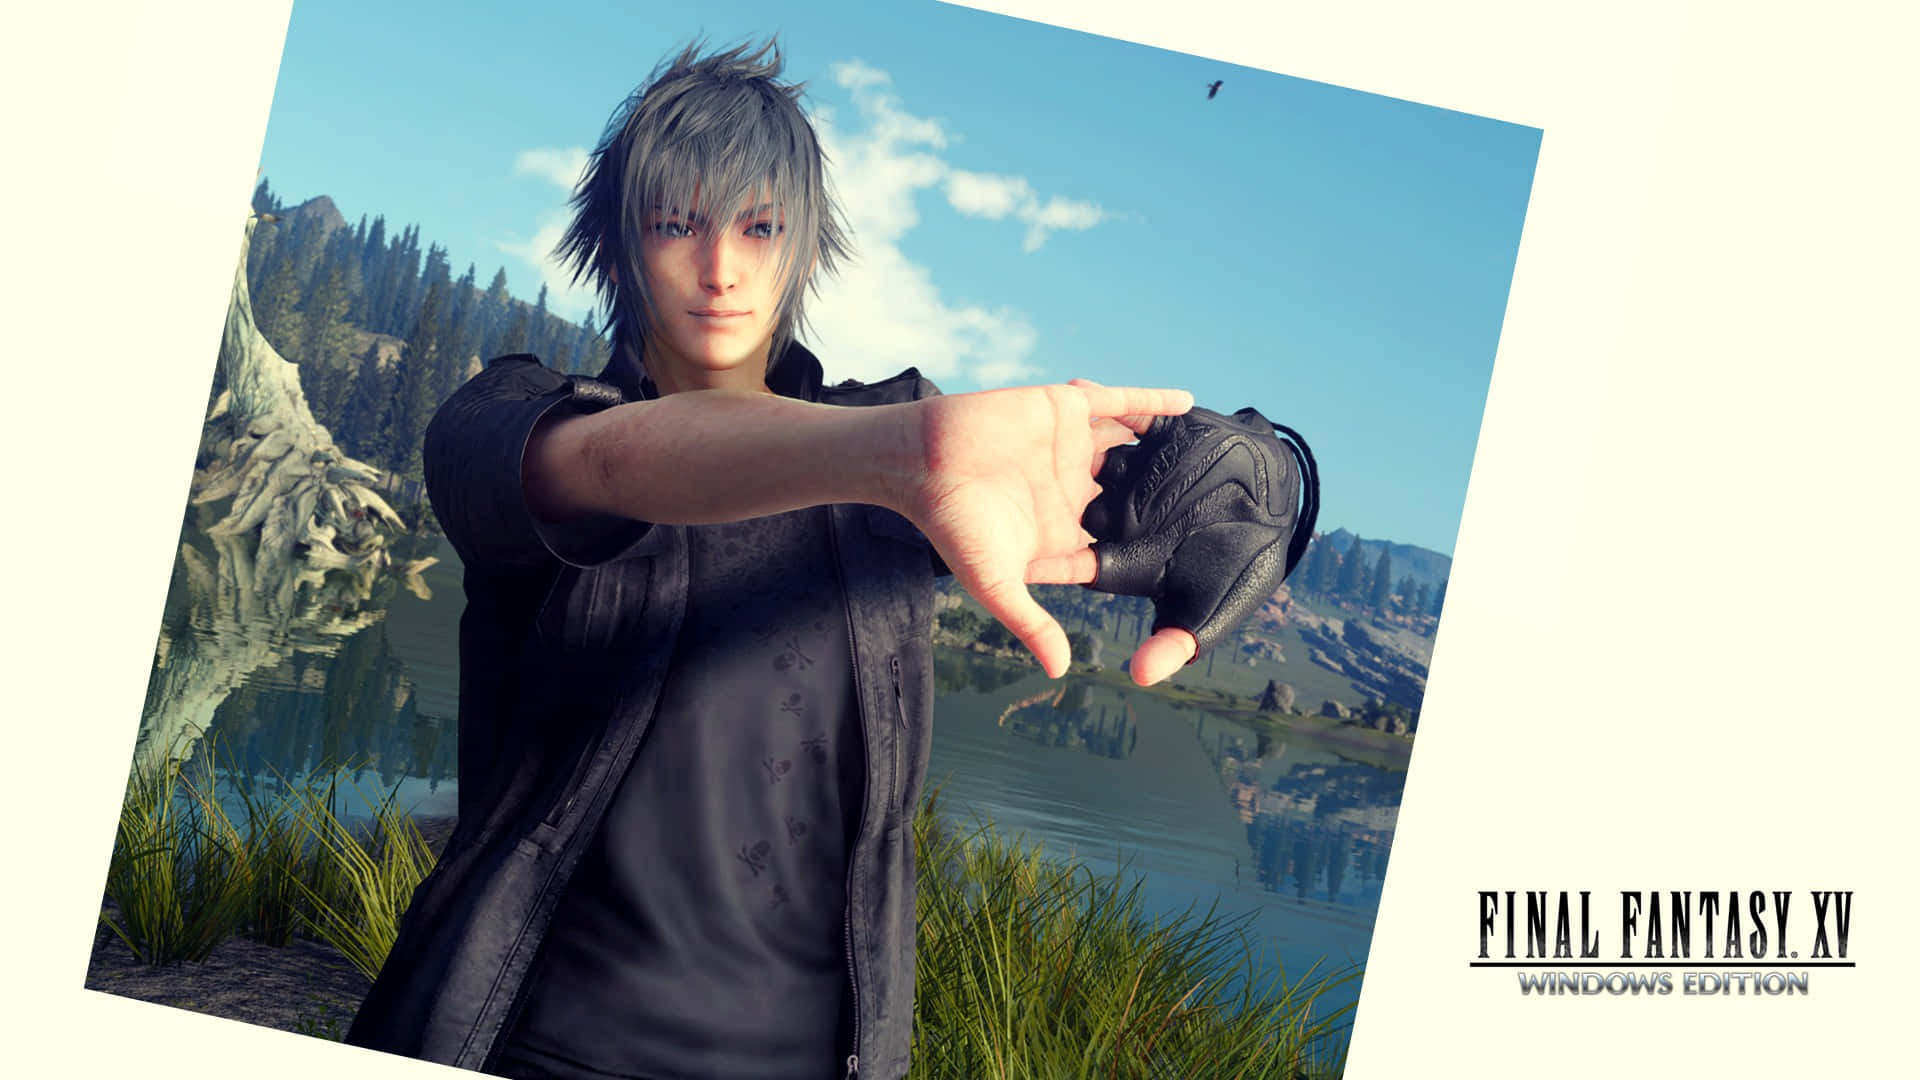 Explore the beautiful and captivating world of Final Fantasy XV in stunning 1080p